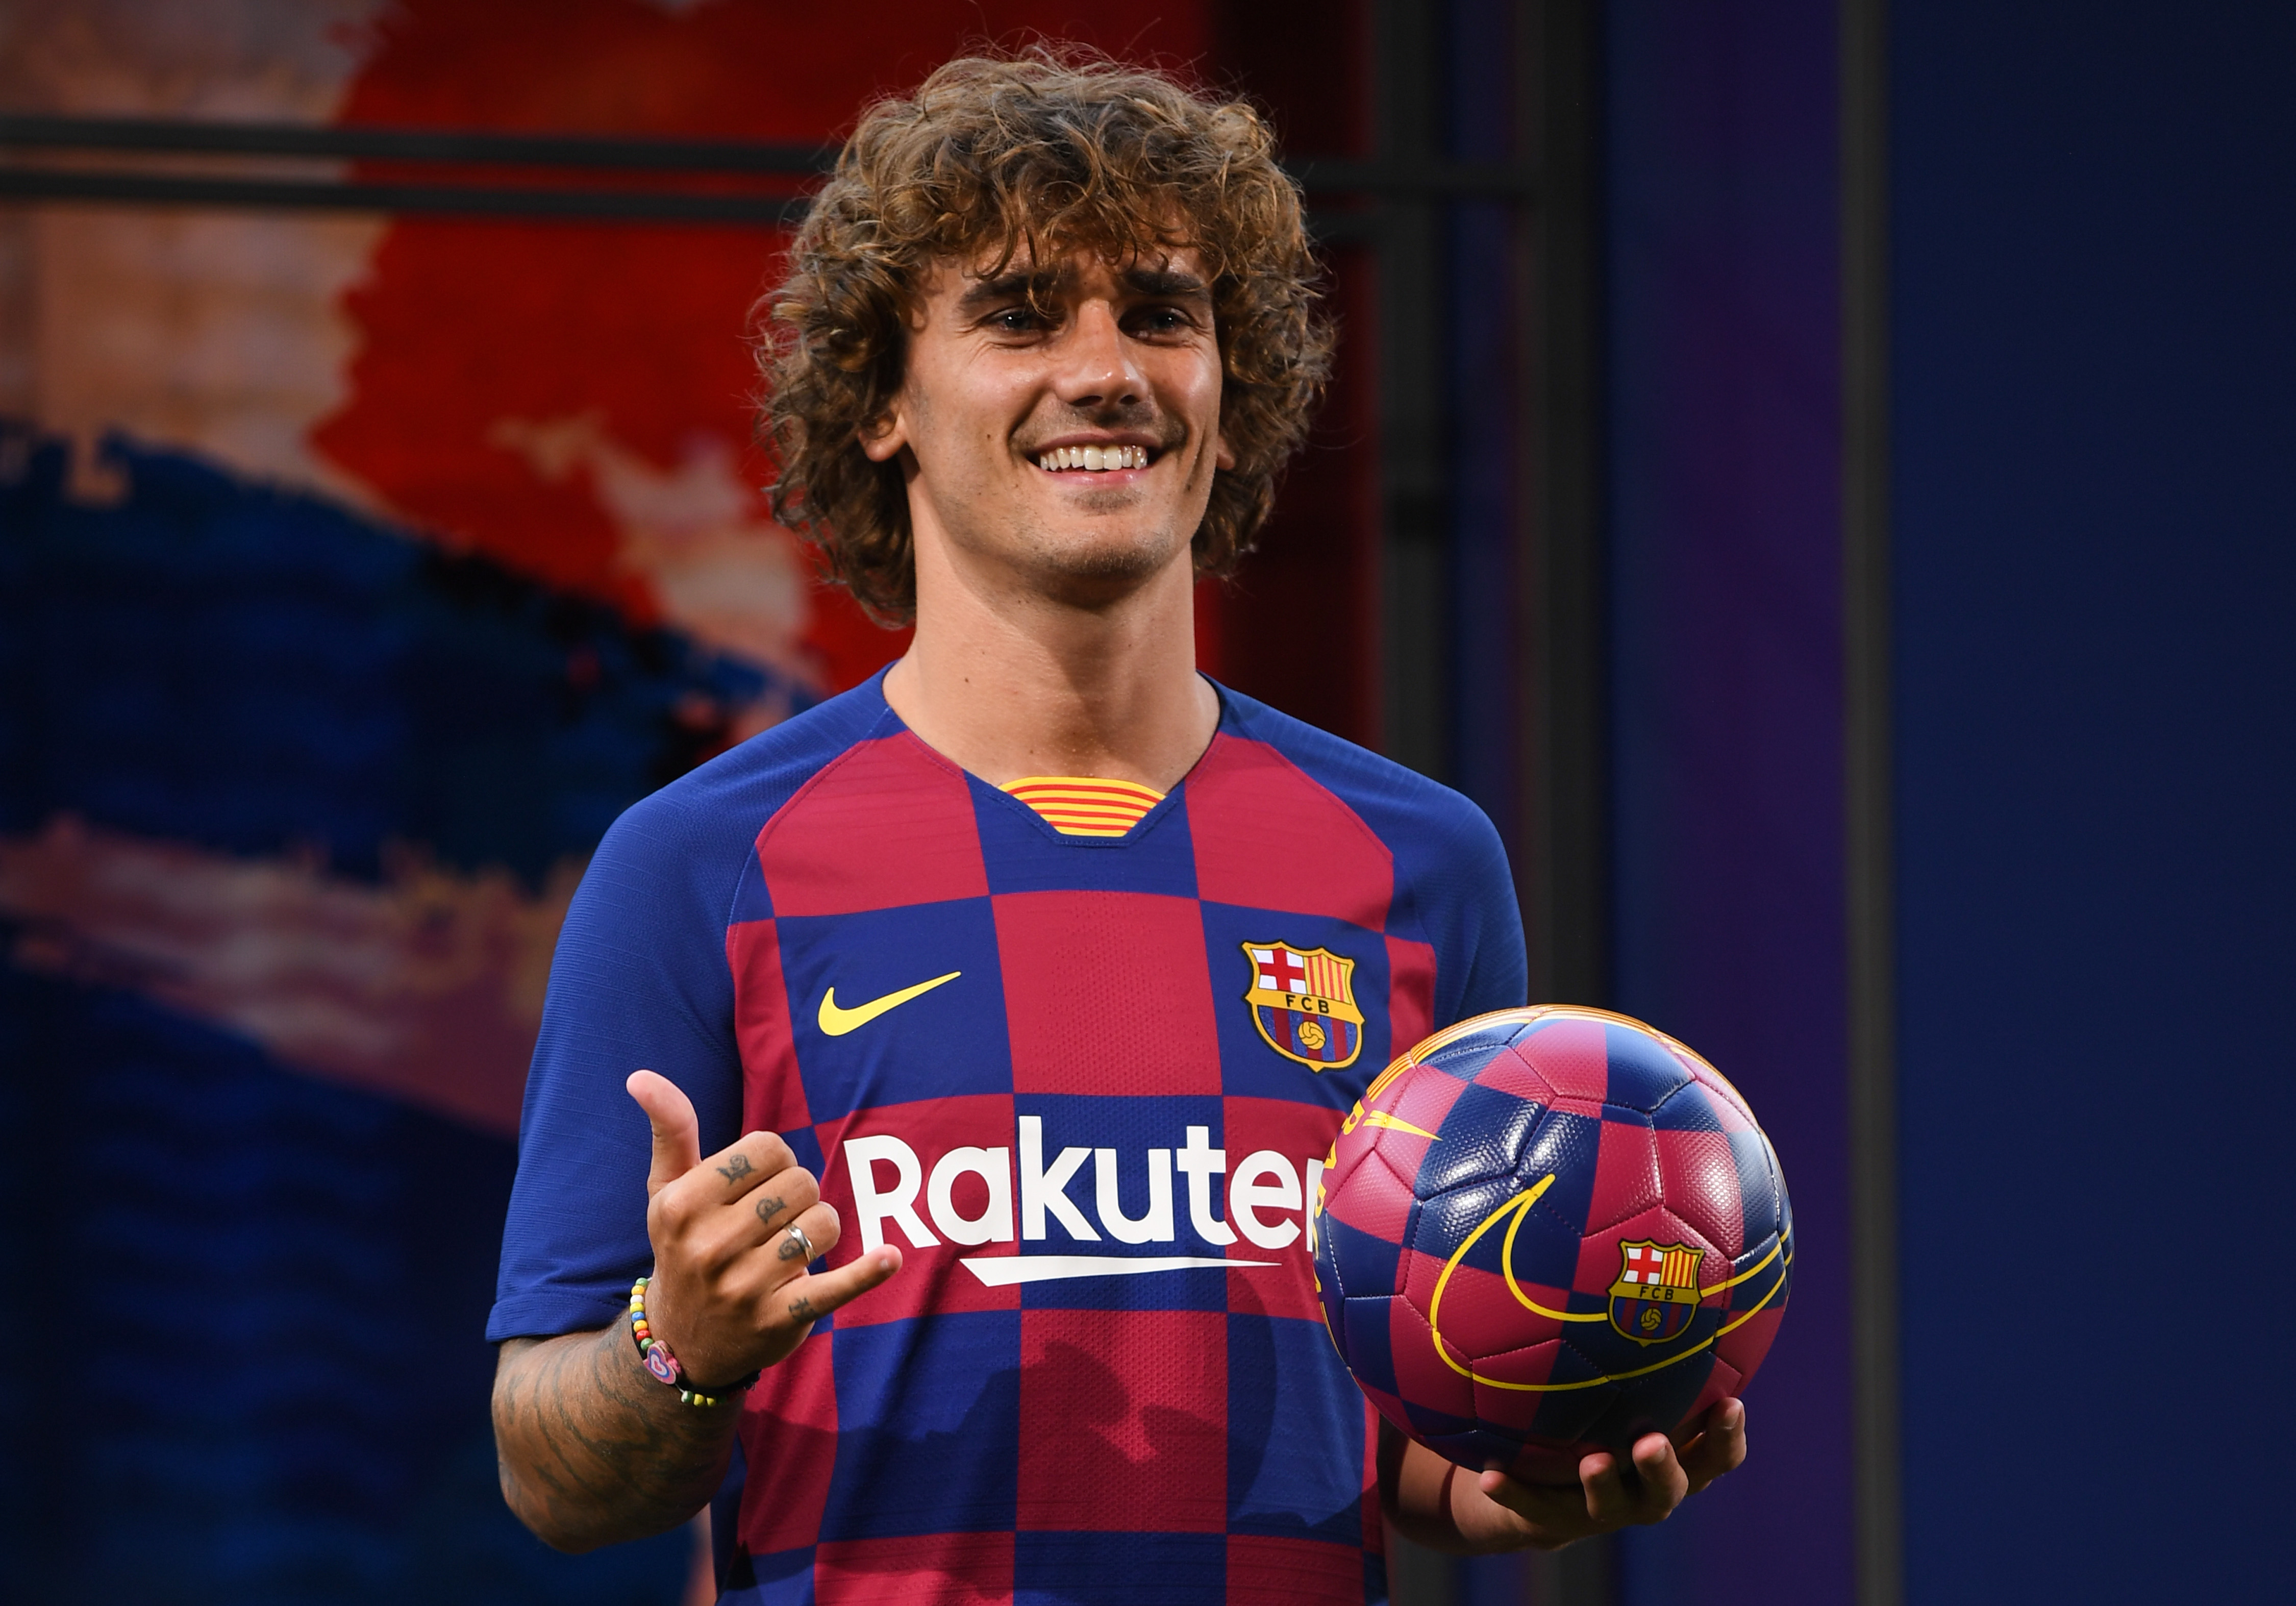 Antoine Griezmann Net Worth 2019 What Is His New Barcelona Contract And How Much Does He Earn